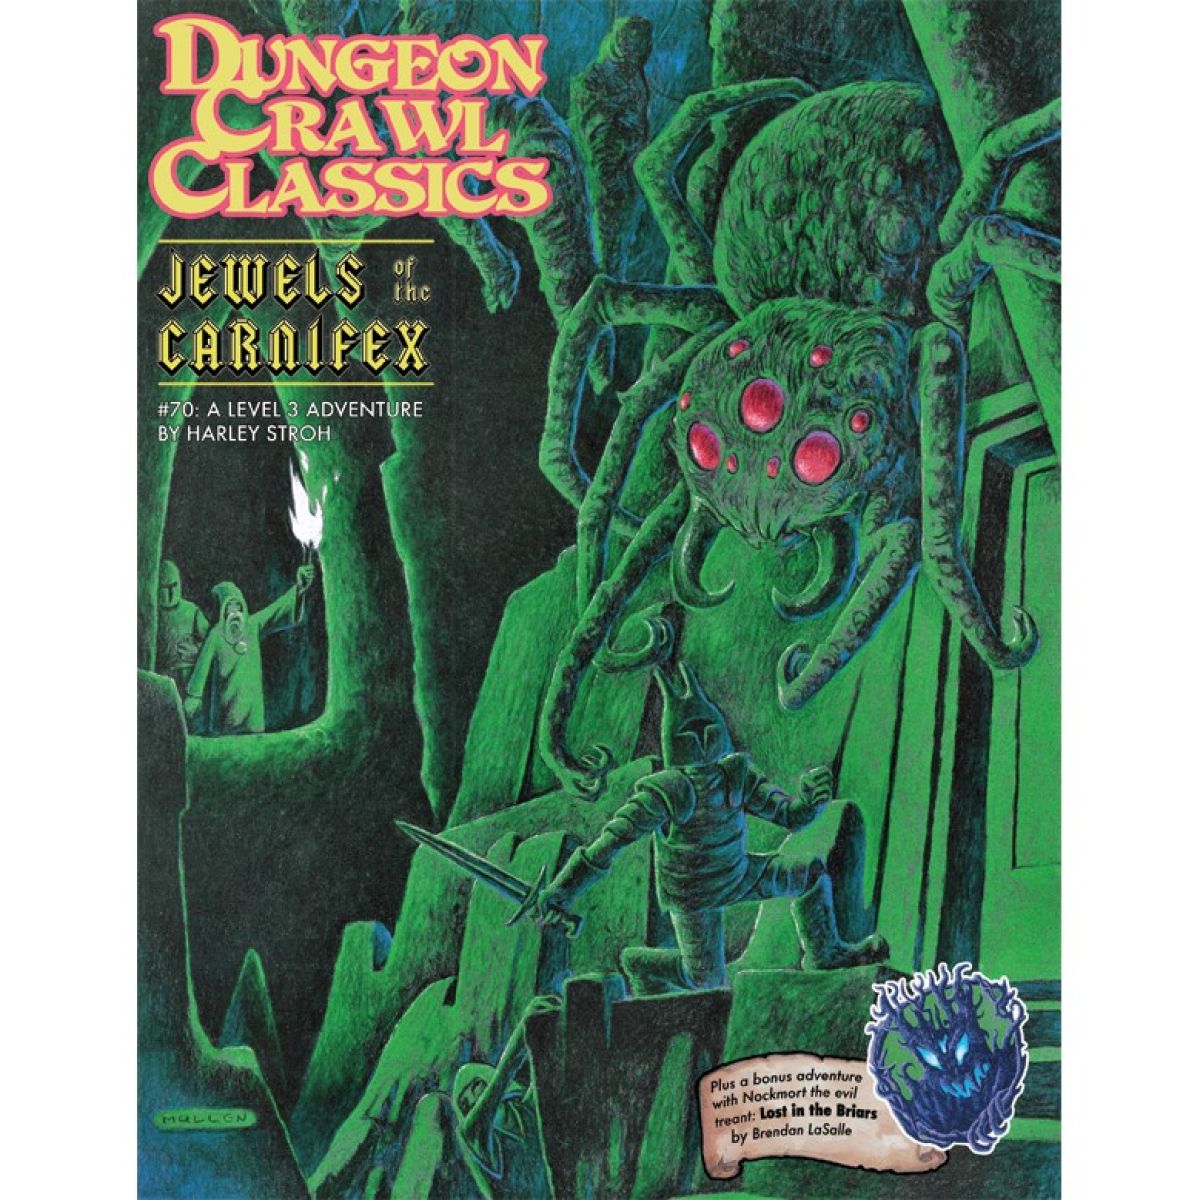 Dungeon Crawl Classics #70 - Jewels of the Carnifex